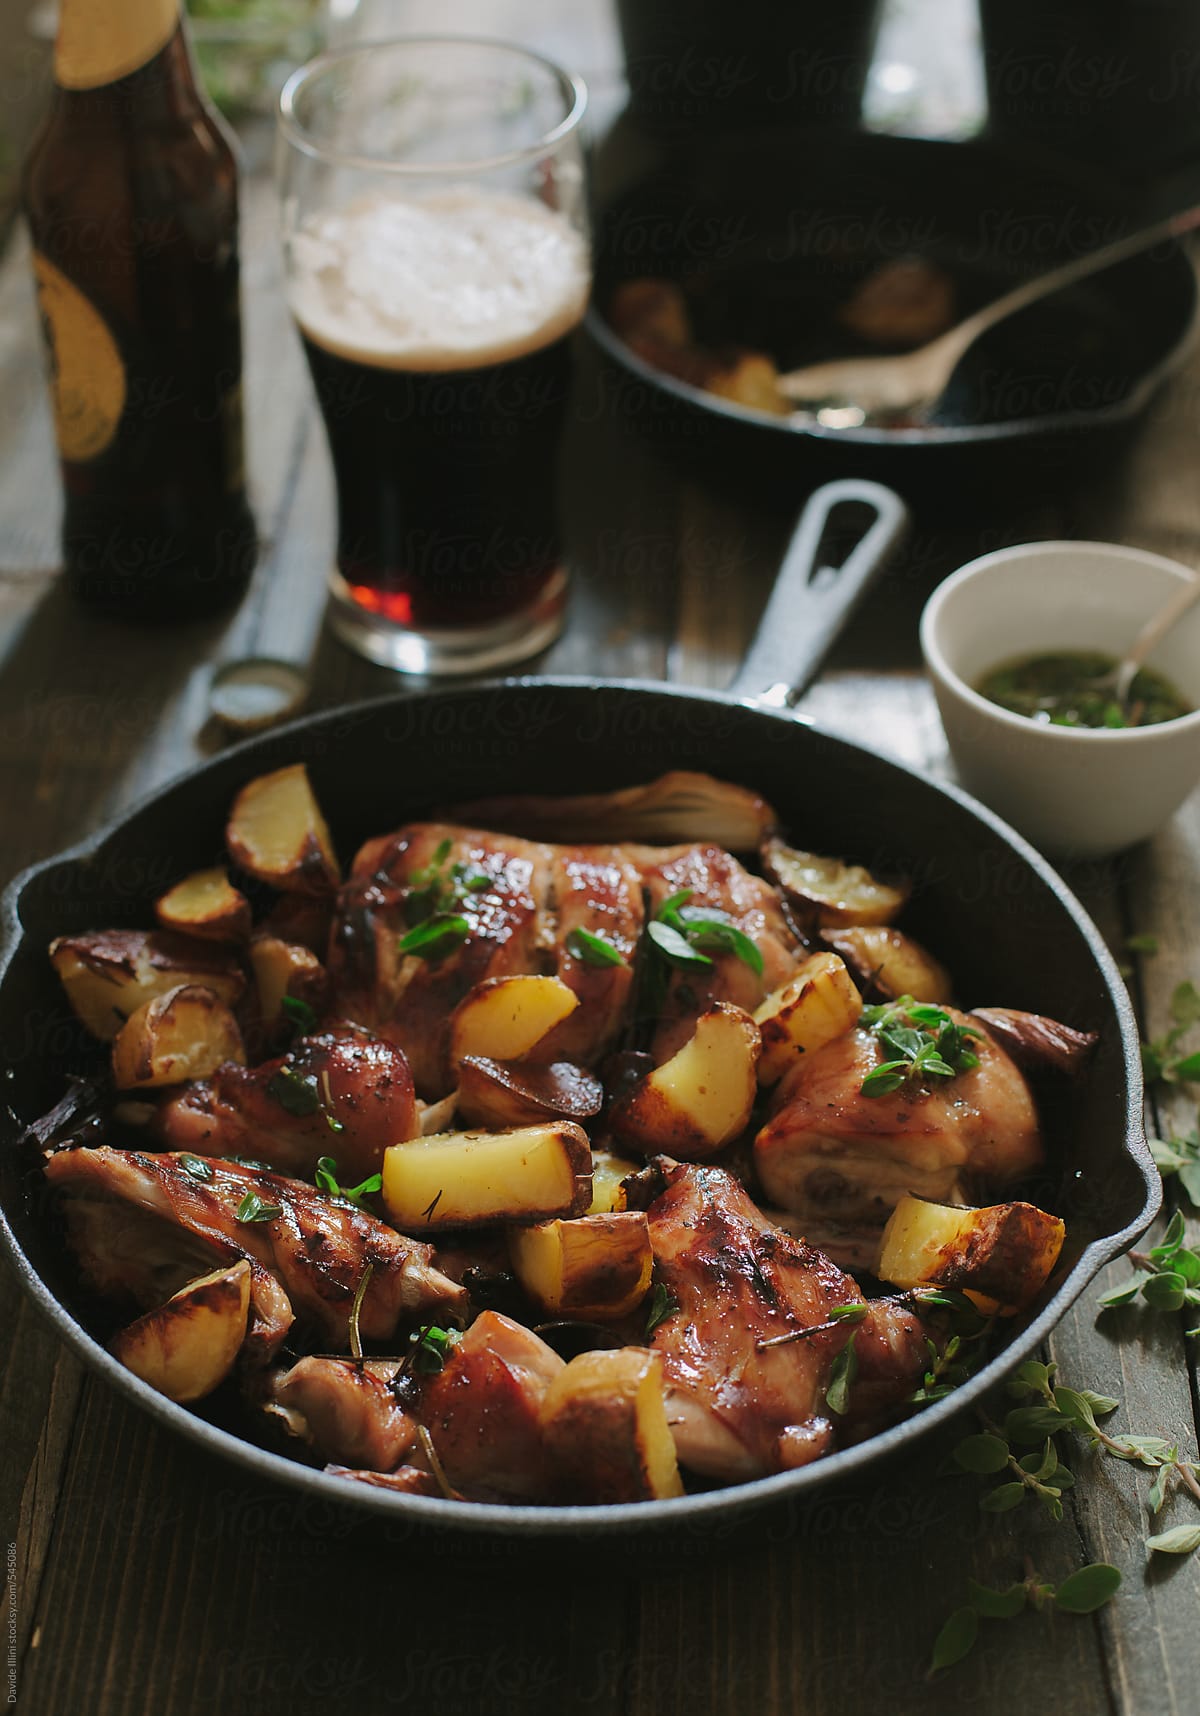 Roasted rabbit with potatoes